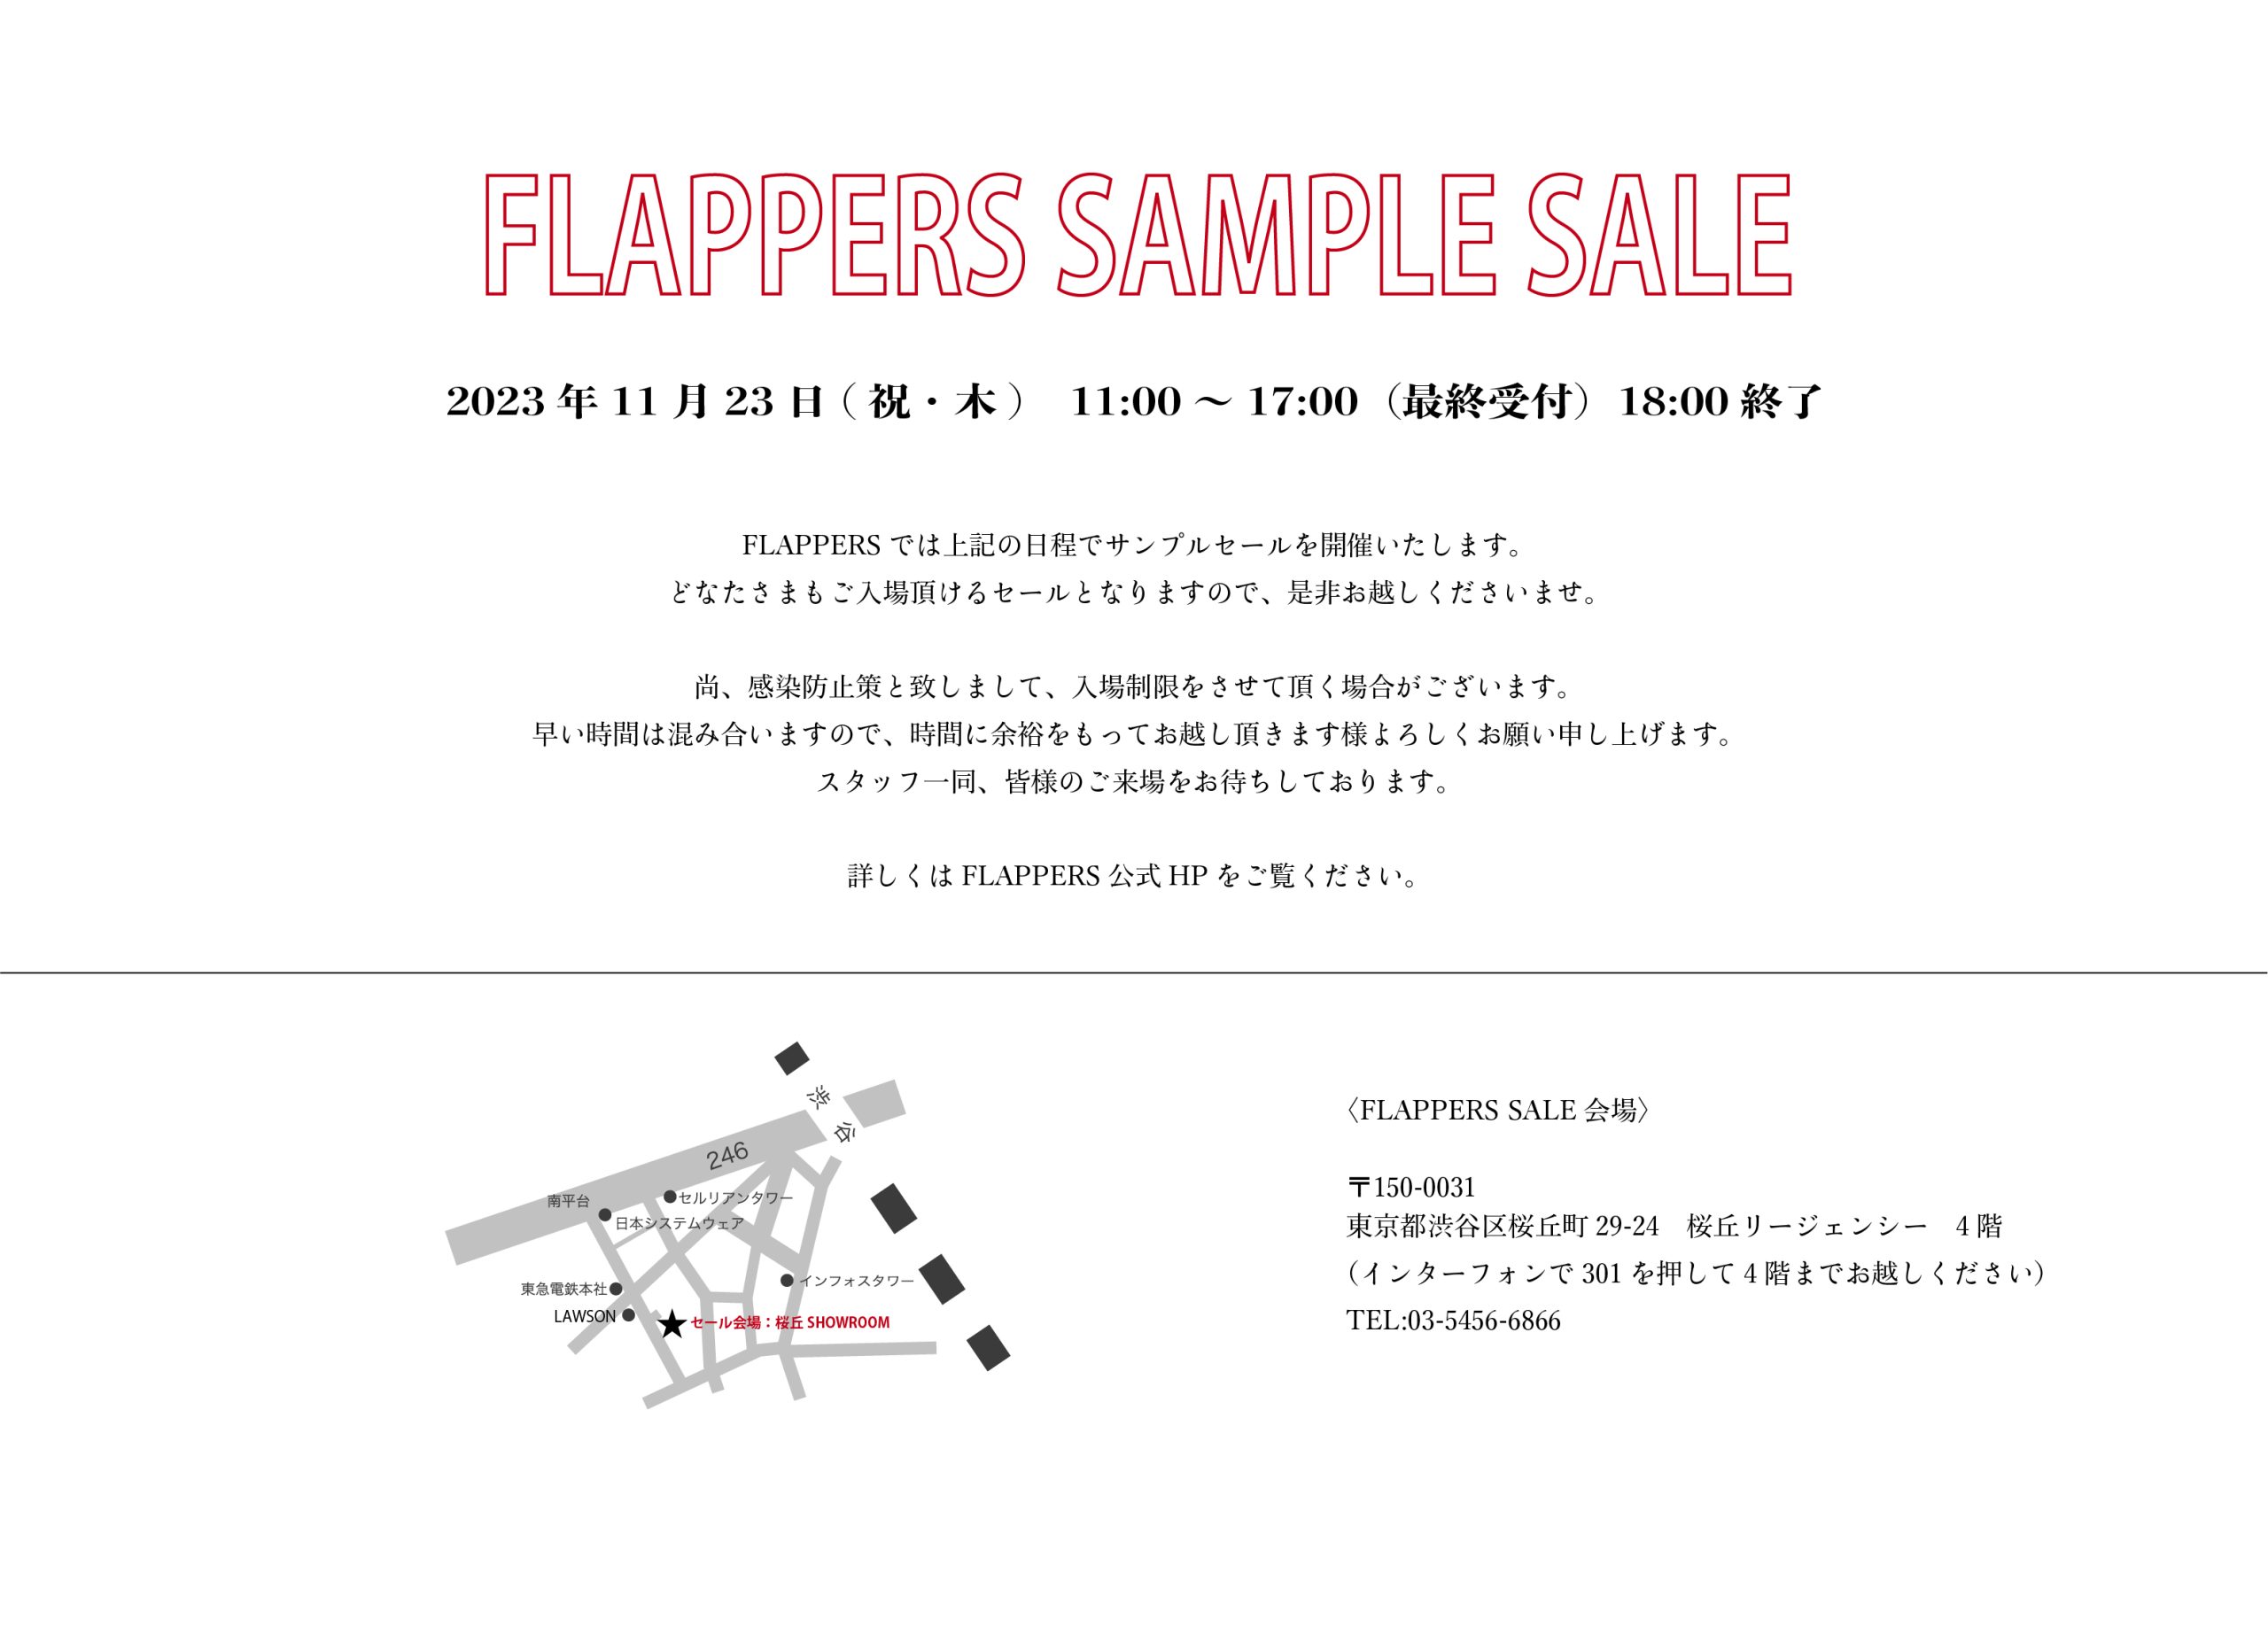 FLAPPERS SAMPLE SALE